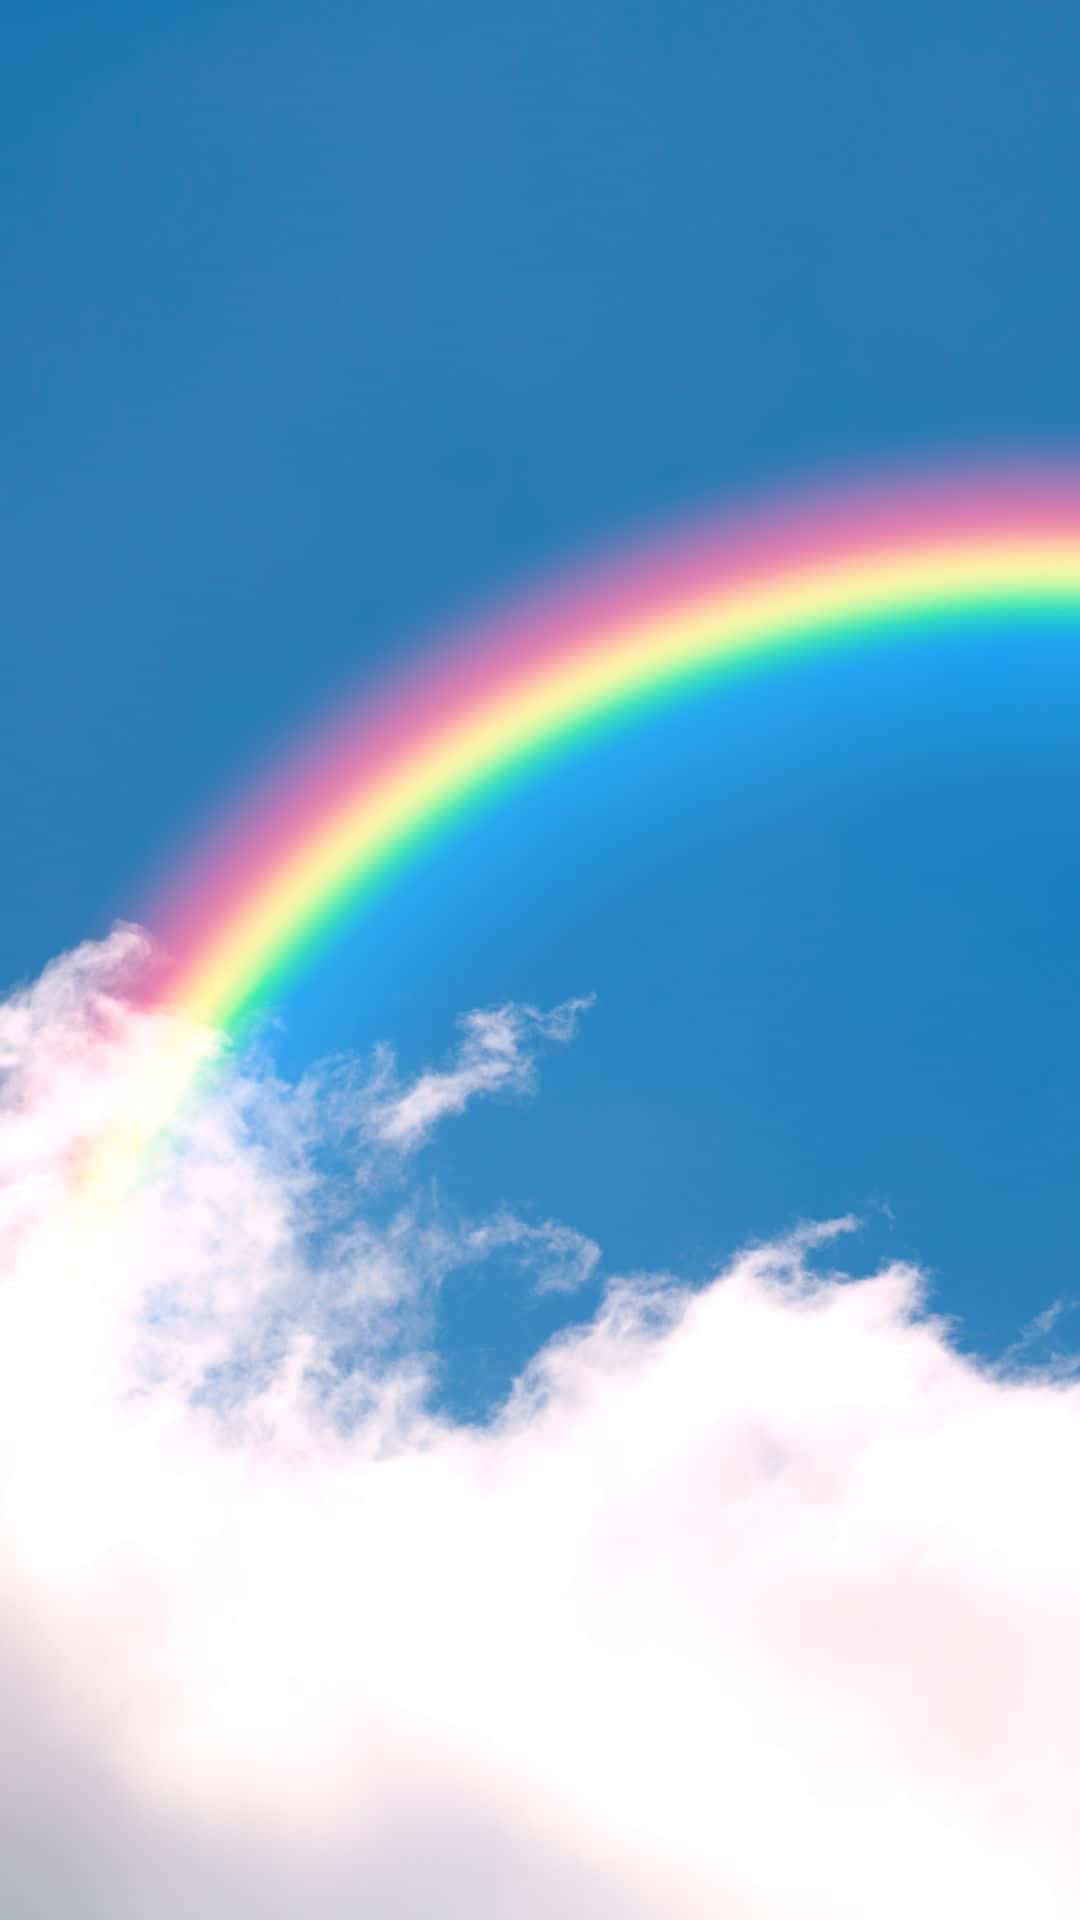 A Rainbow Is Seen In The Sky Above A Cloud Background